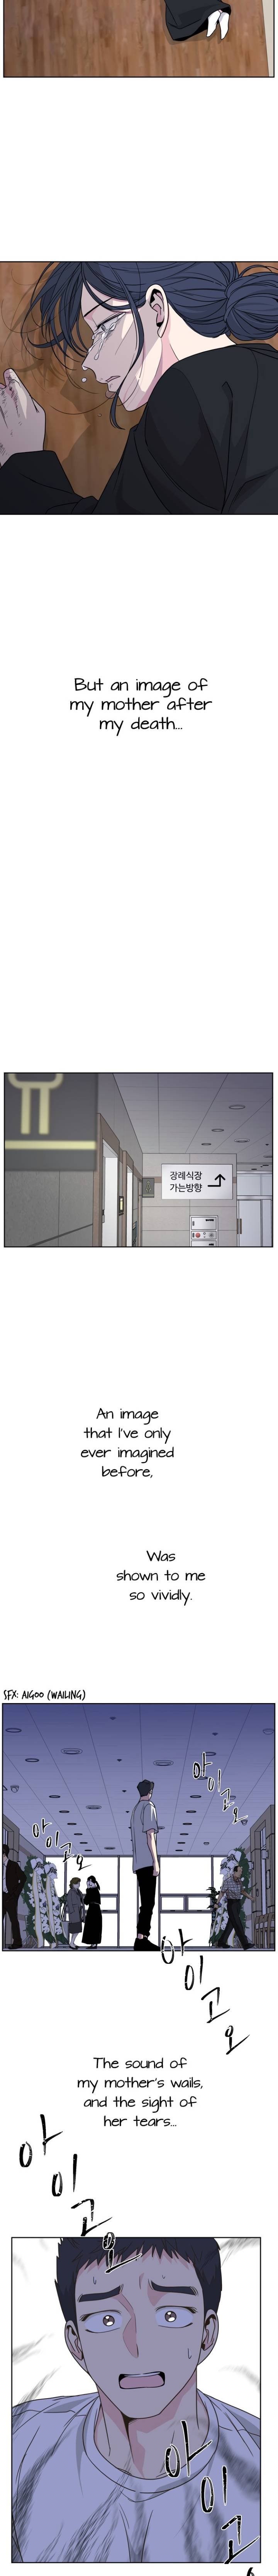 mother-im-sorry-chap-28-5